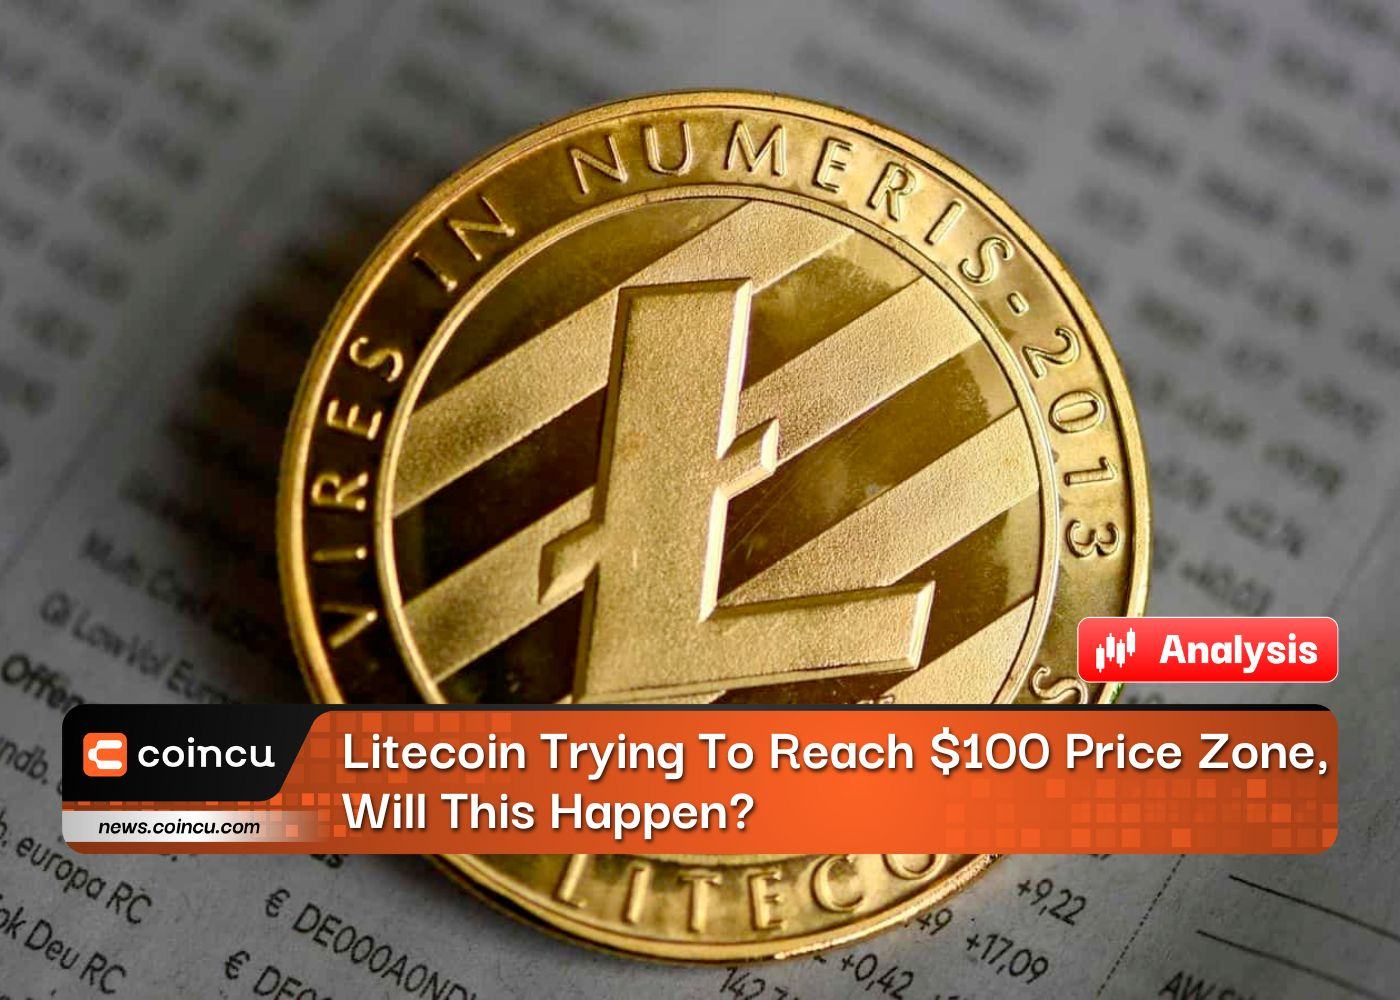 Litecoin Trying To Reach $100 Price Zone, Will This Happen?